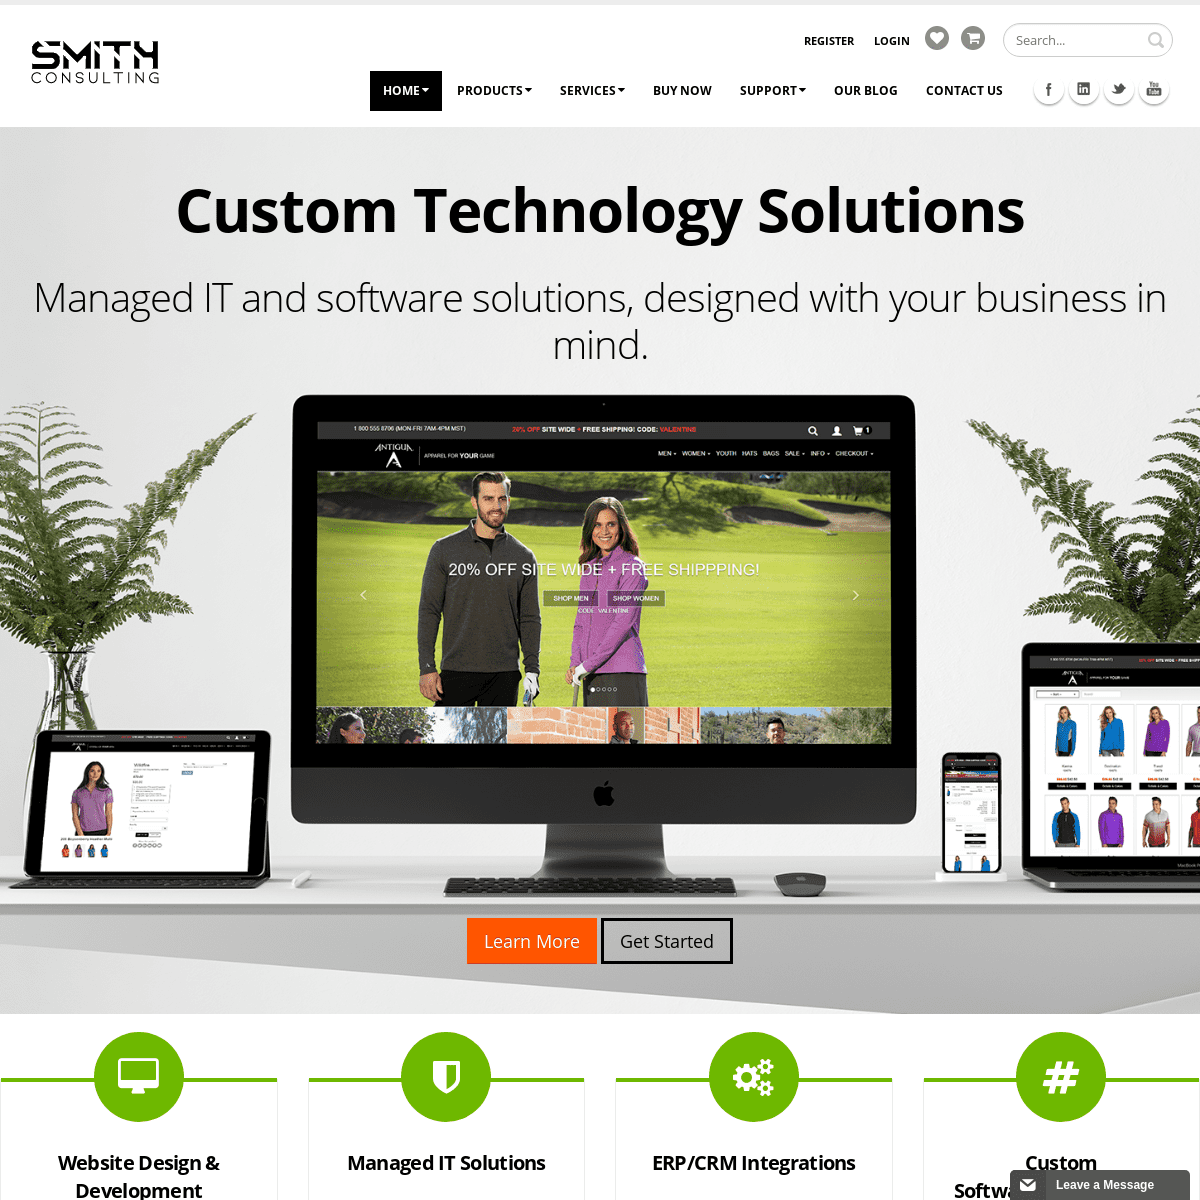 A complete backup of smith-consulting.com